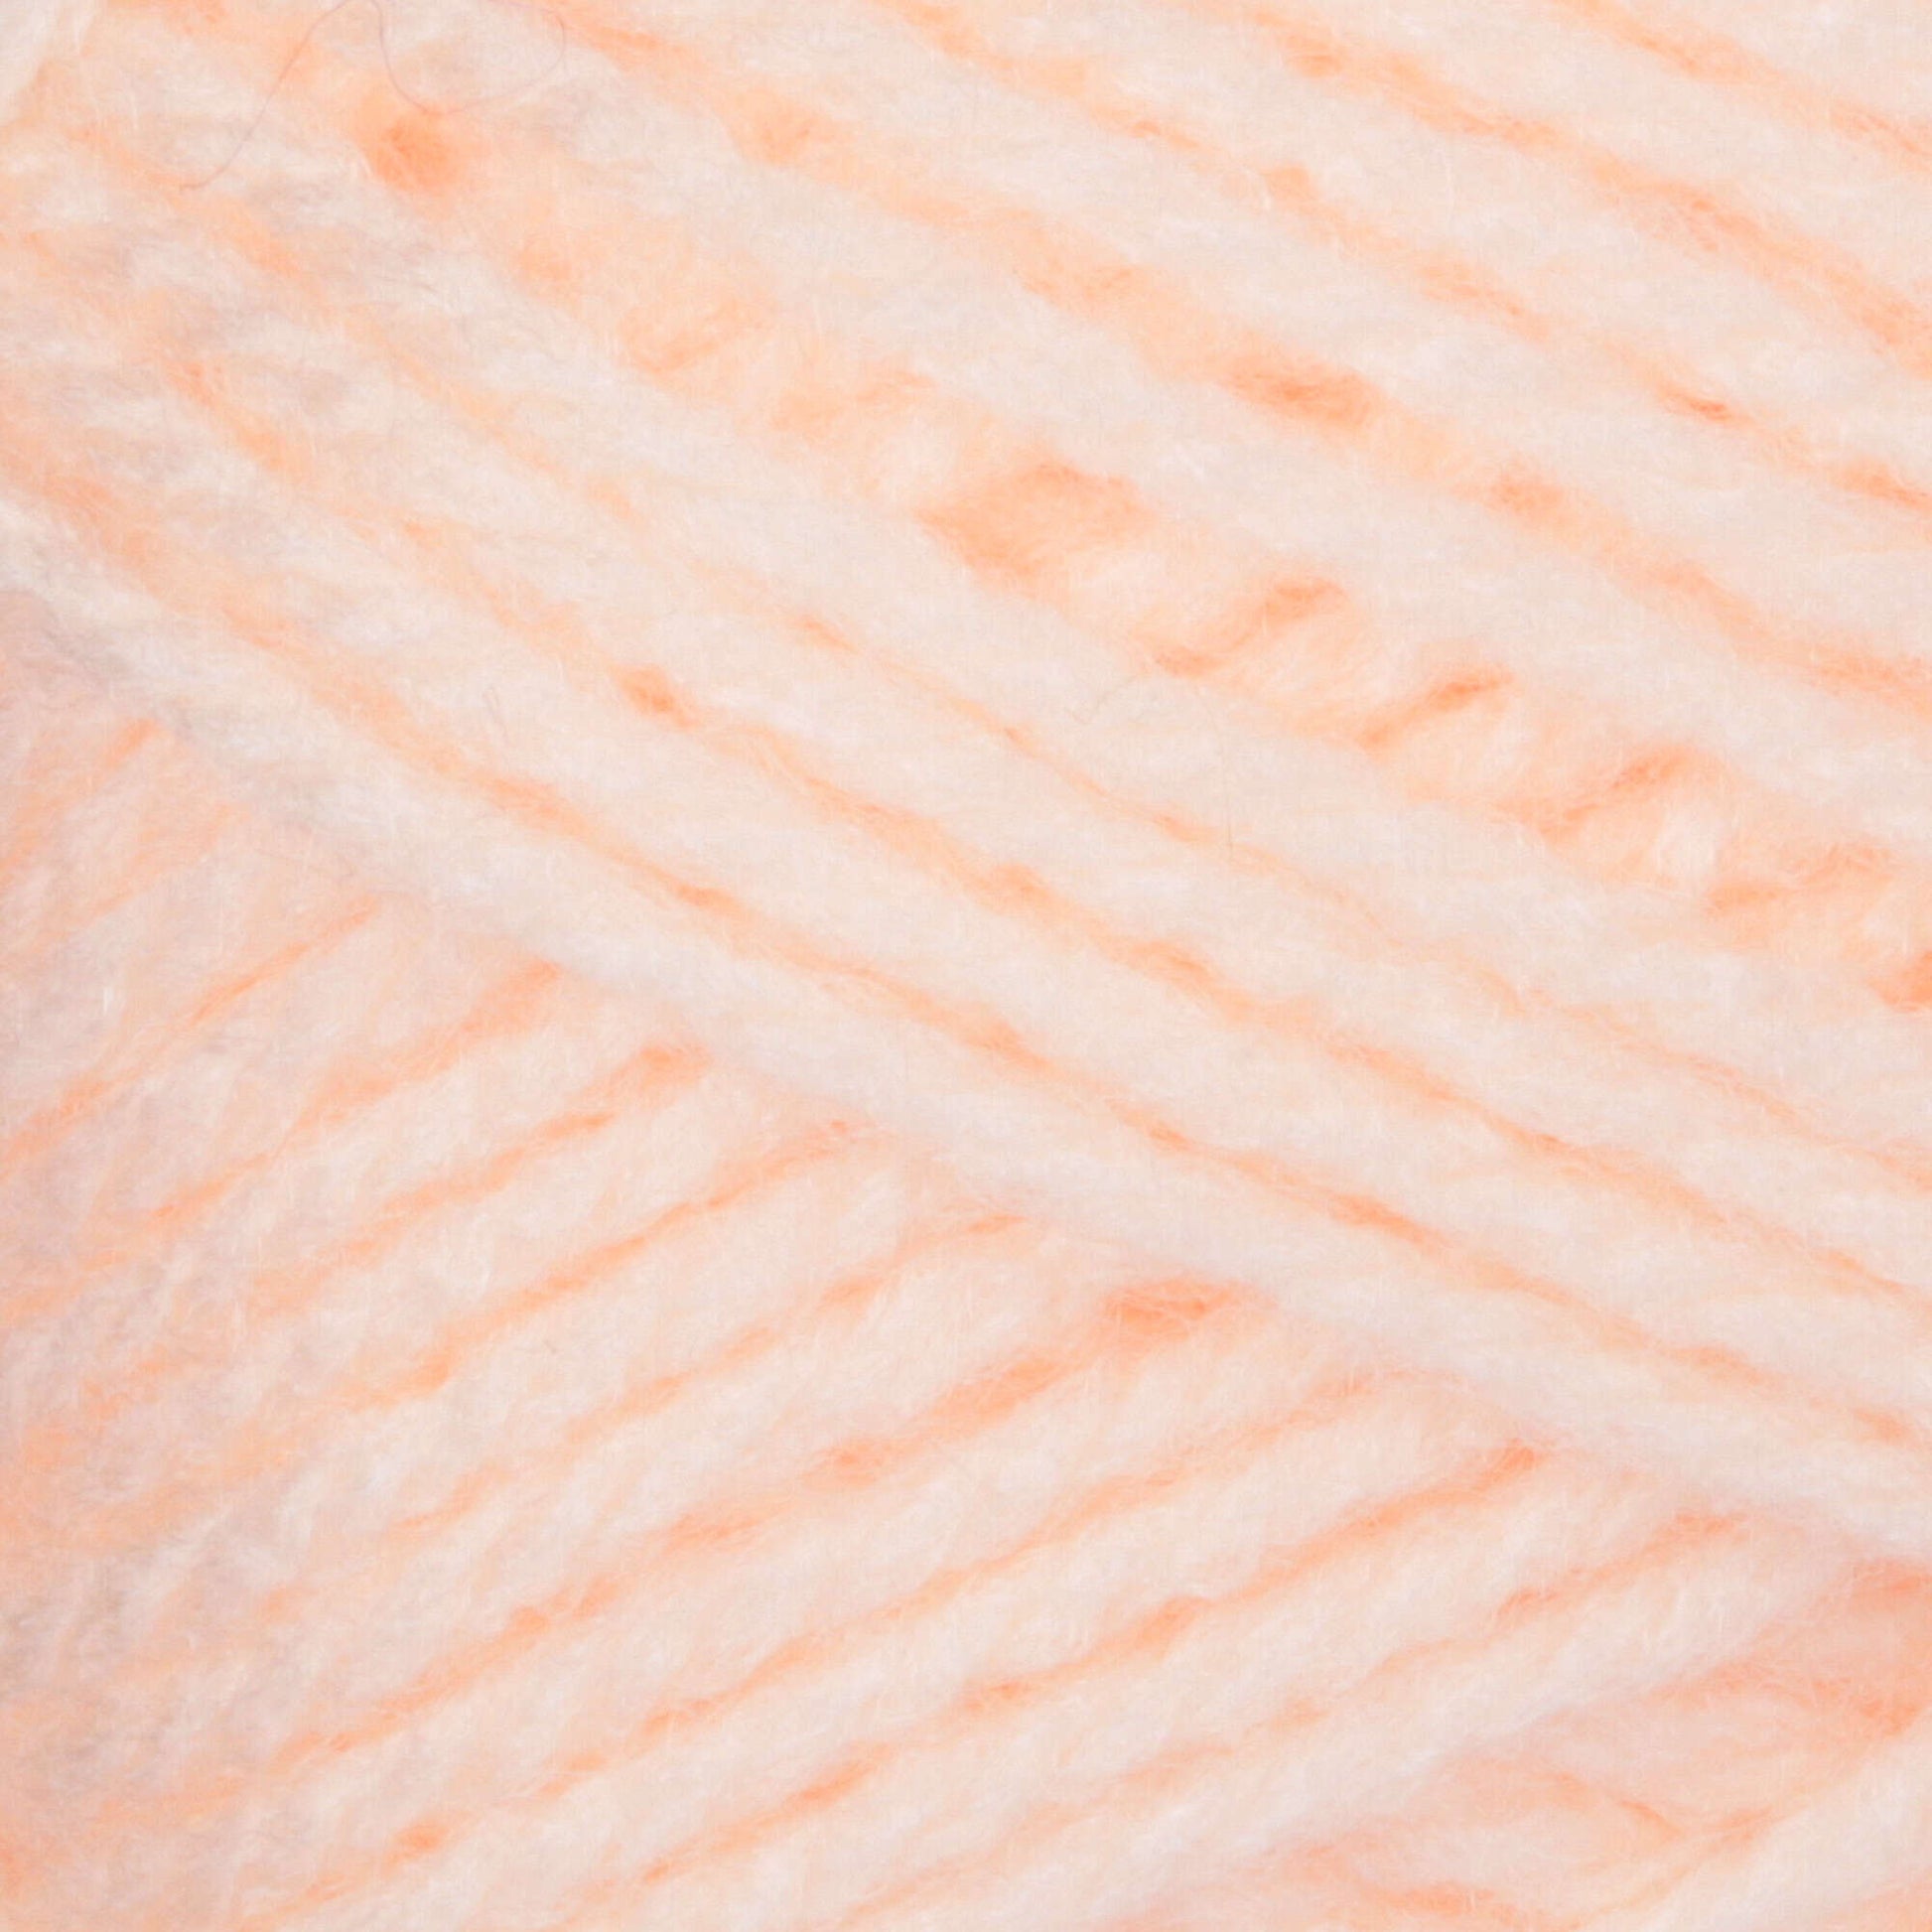 Patons® Astra - Apricot (detail)